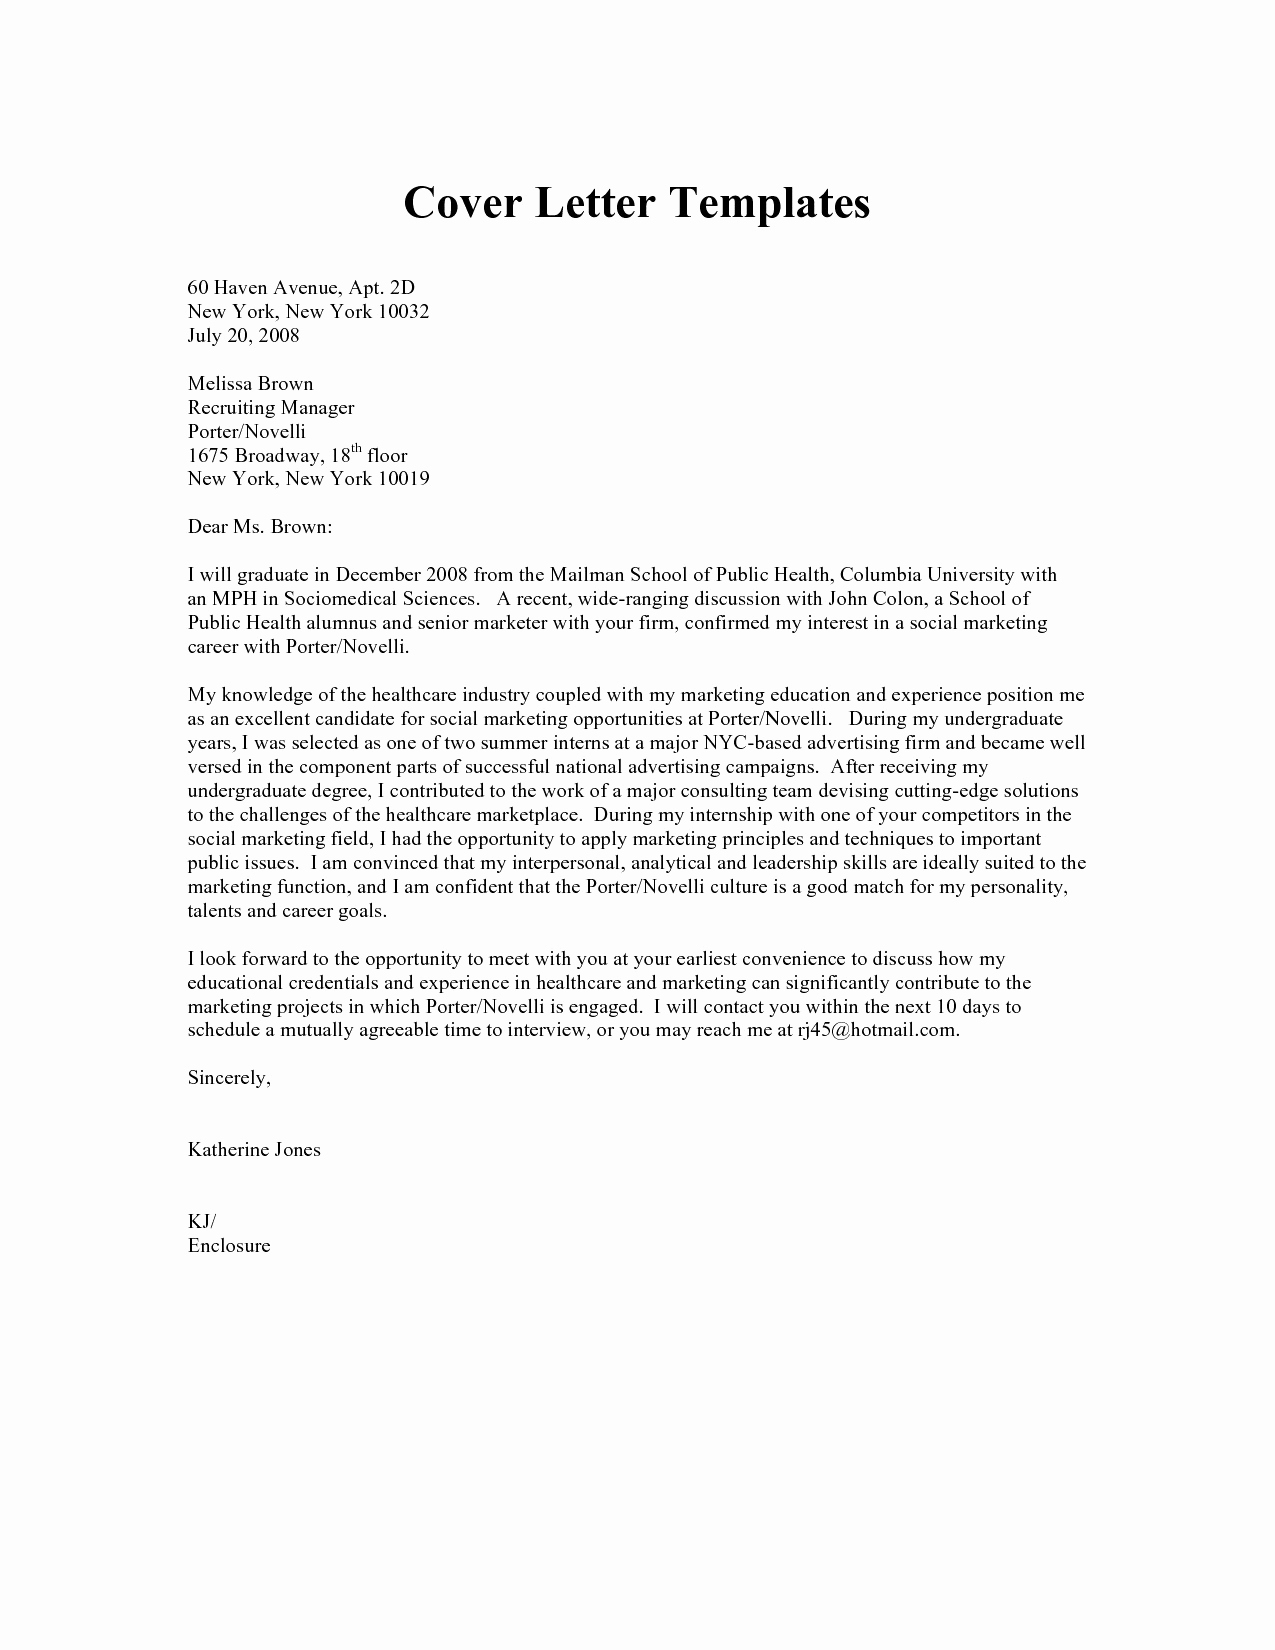 recruitment-letter-template-samples-letter-template-collection